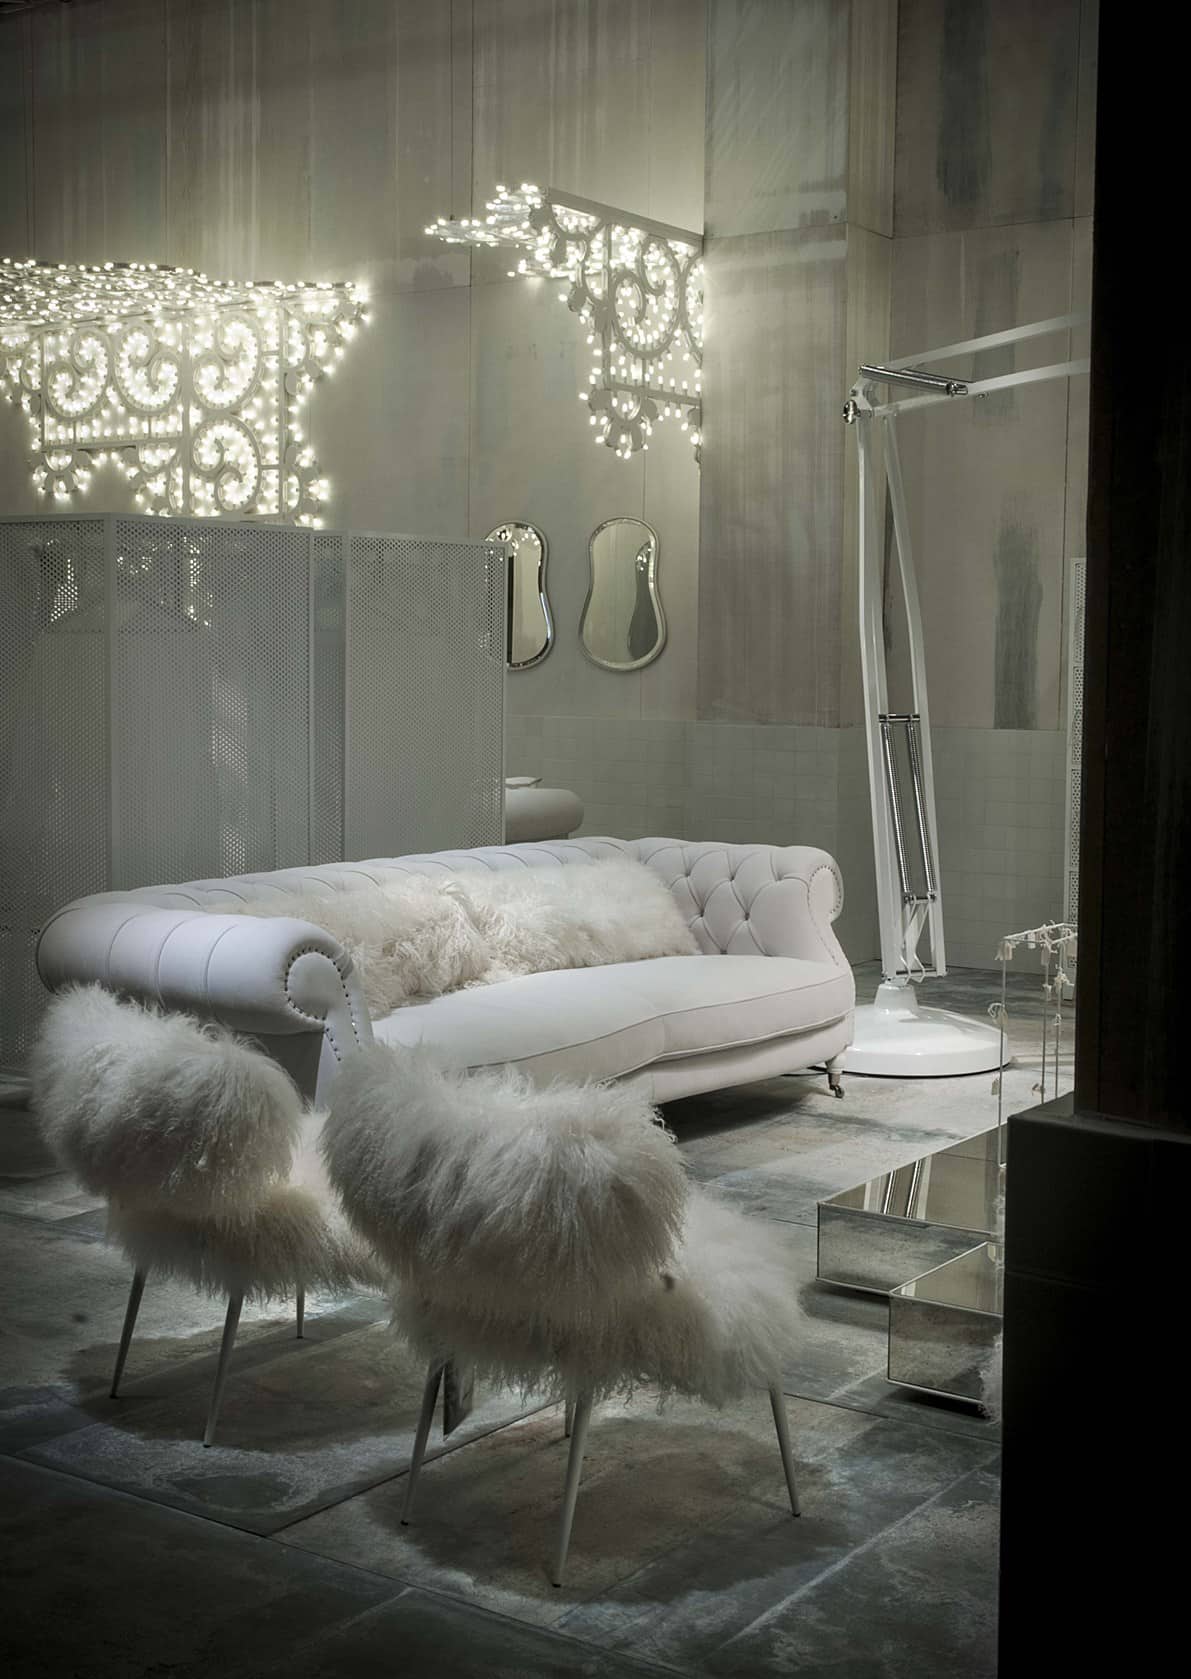 paola navone designs white fairy tale interiors latest furniture baxter 10